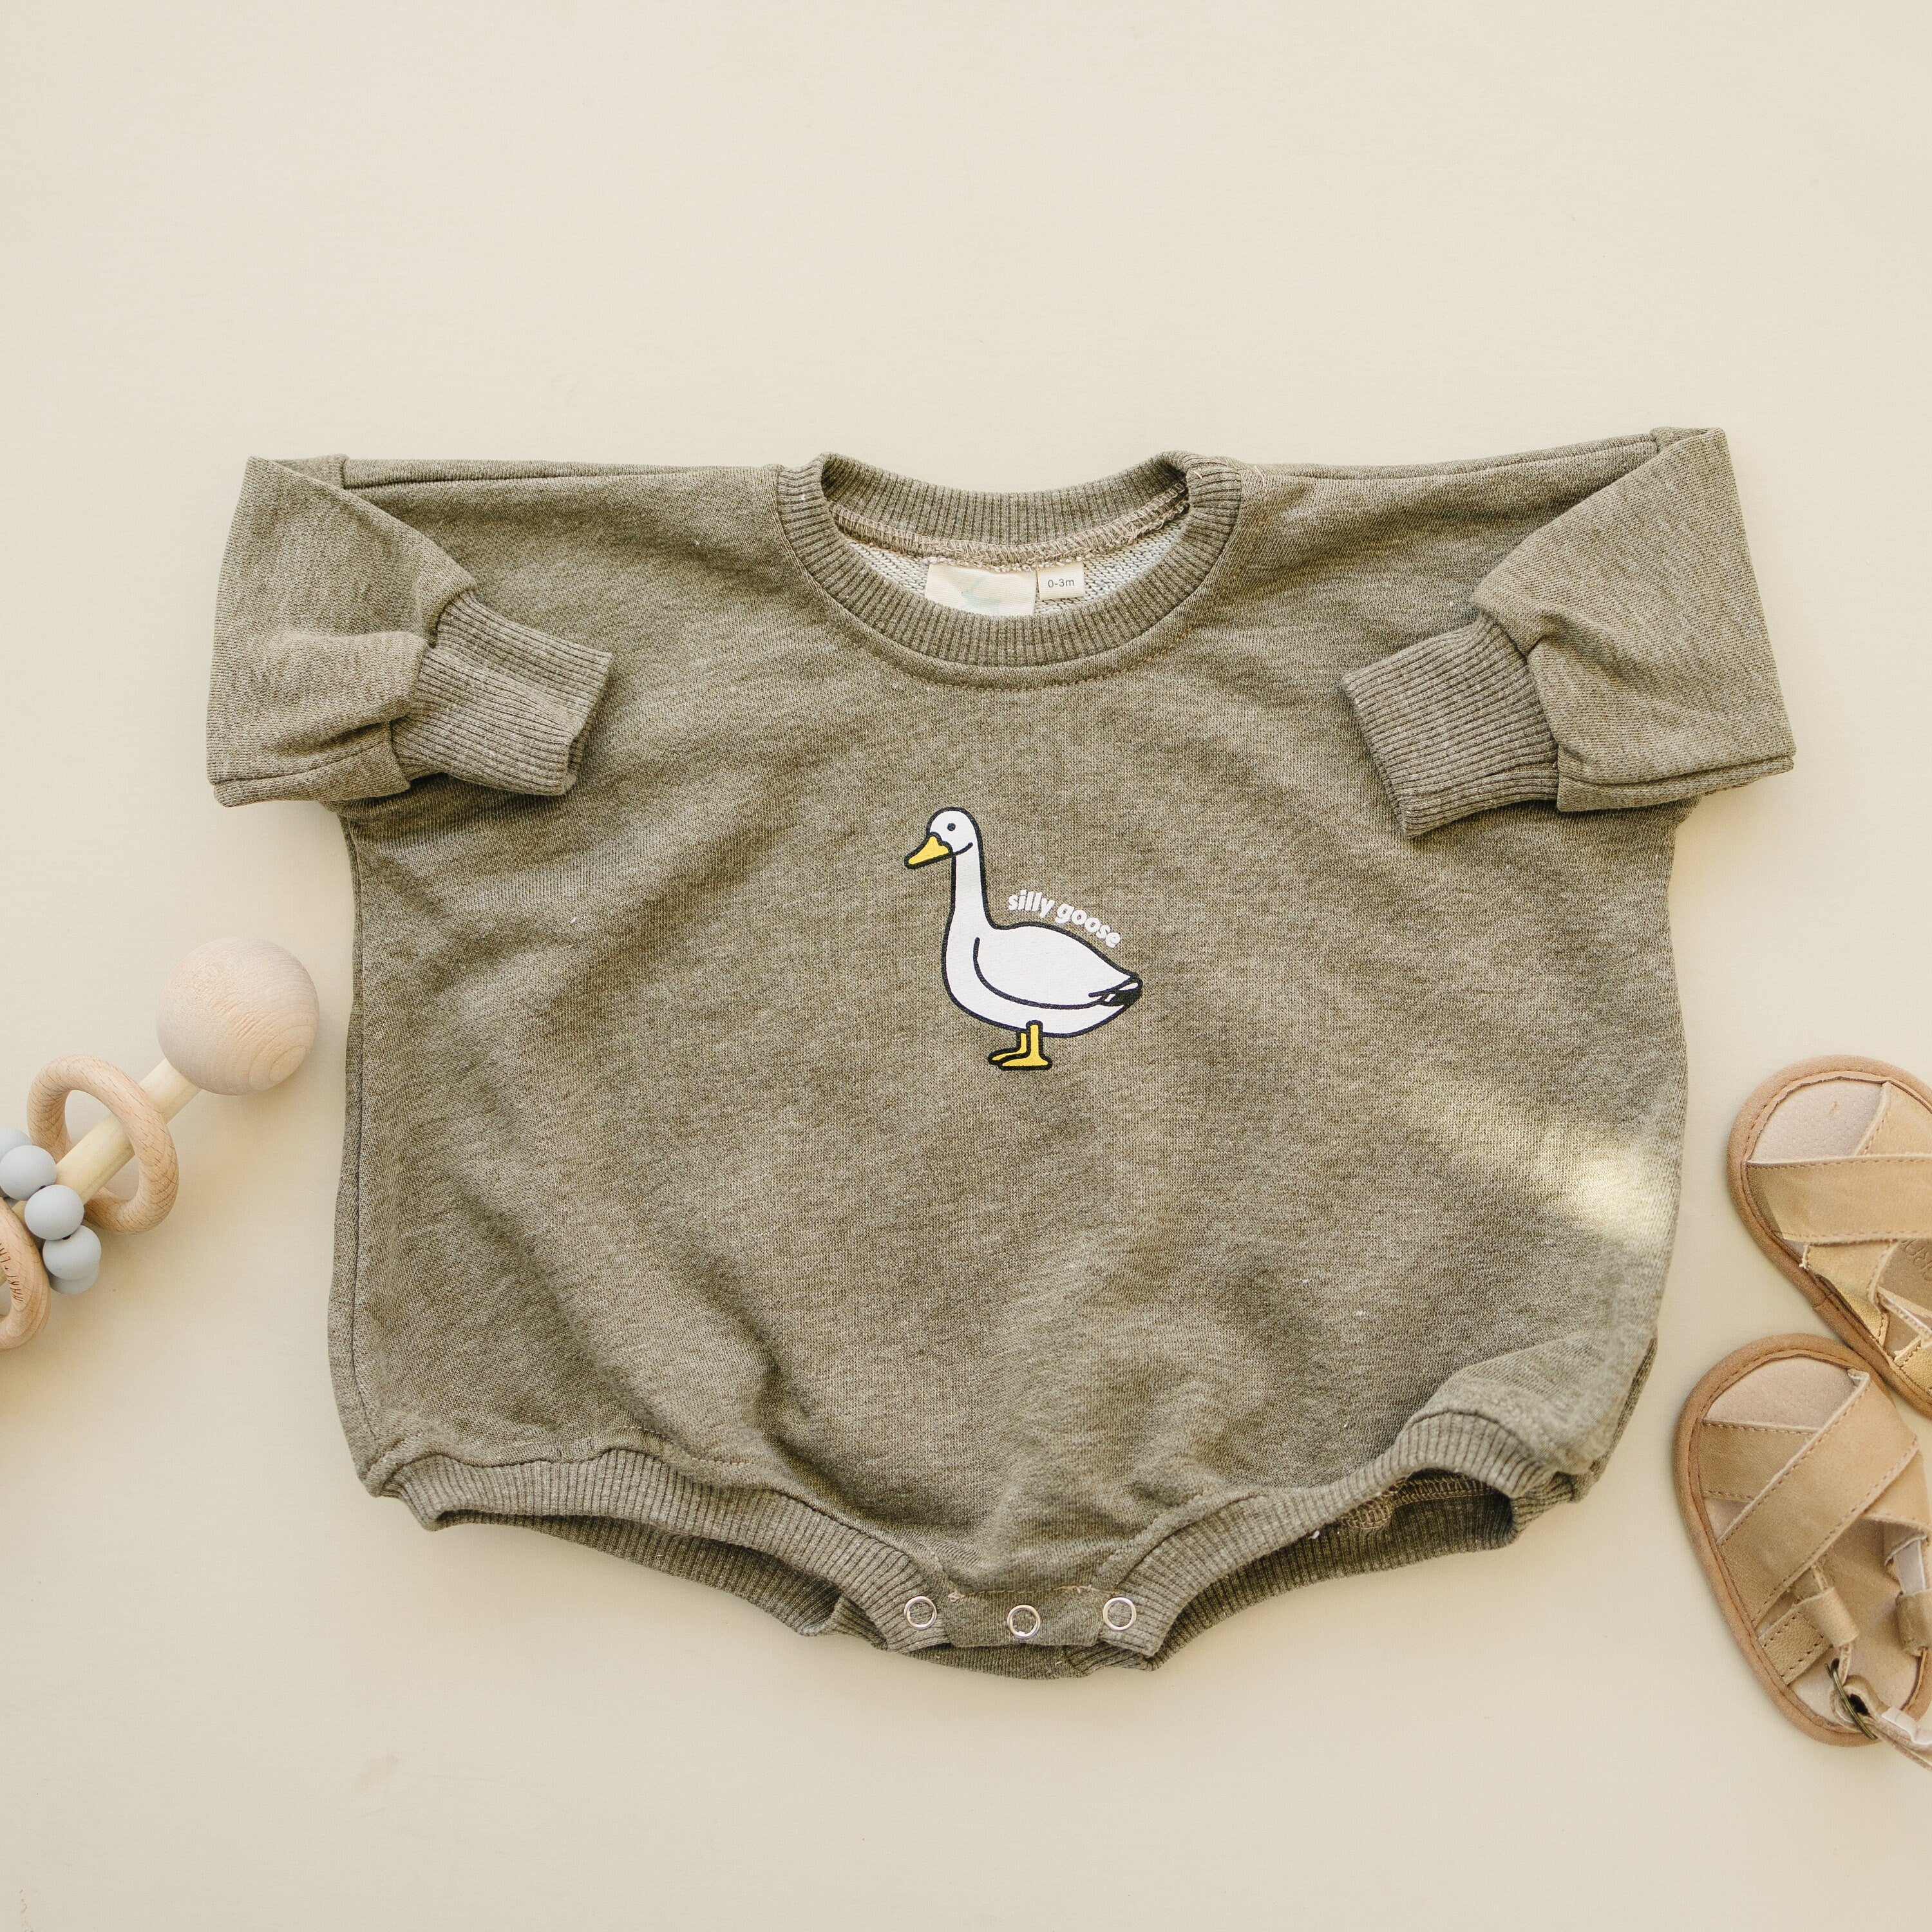 Silly Goose Oversized Sweatshirt Romper - Neutral Baby Bubble Romper - Baby Boy Outfit - Baby Girl Clothes - Blue Taupe - Geese Duck